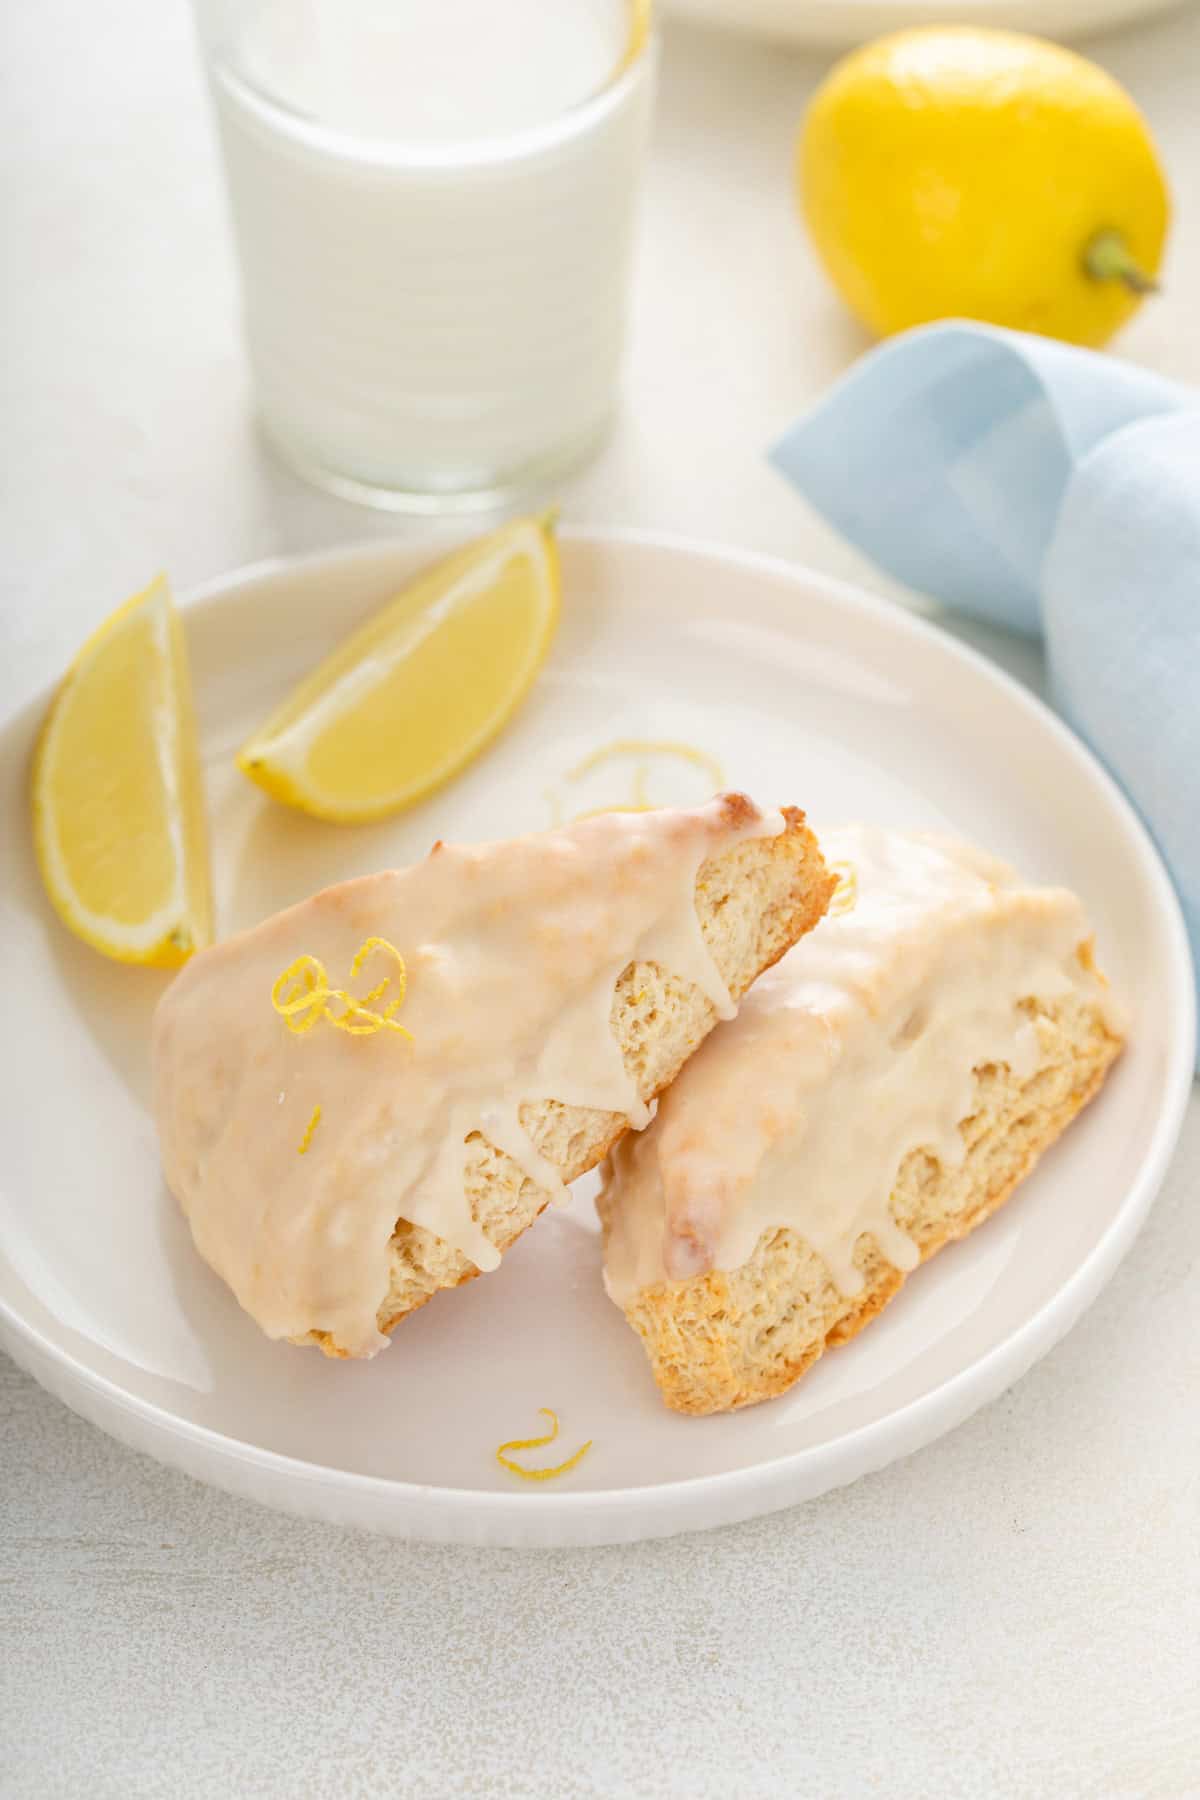 Two lemon scones next to lemon wedges on a white plate.